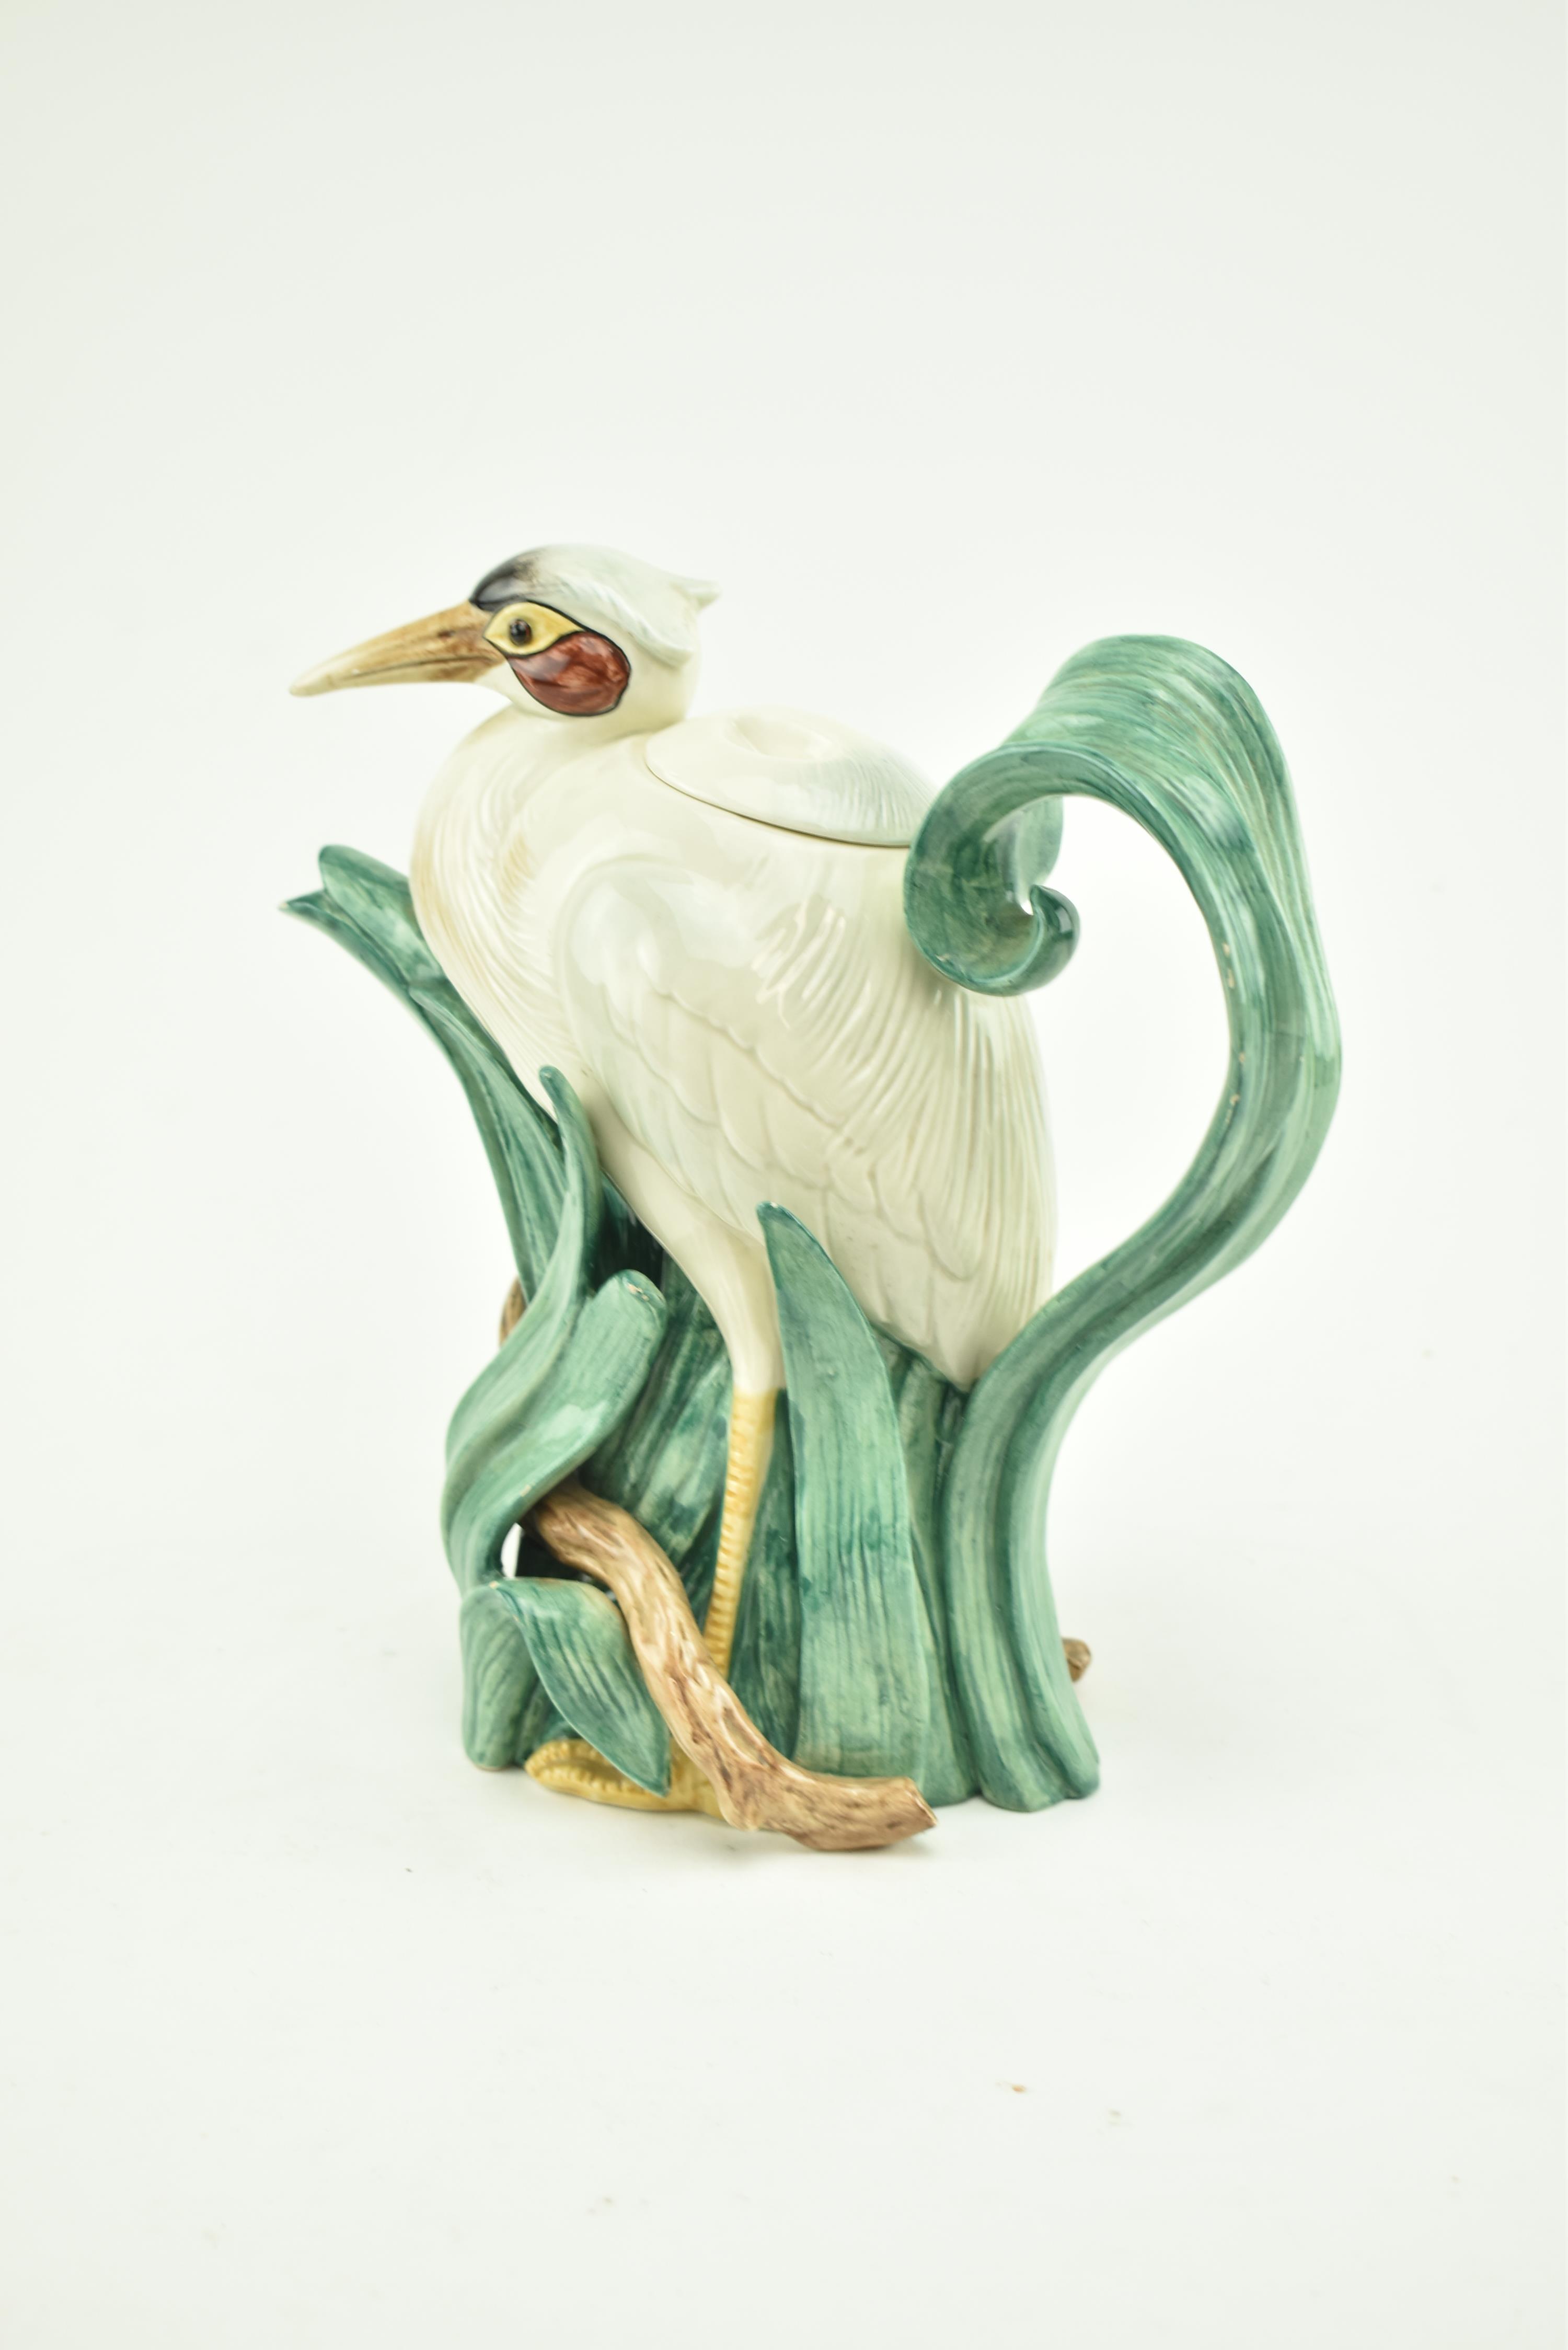 VINTAGE FITZ & FLOYD CERAMIC TEAPOT IN THE SHAPE OF A HERON - Image 5 of 6